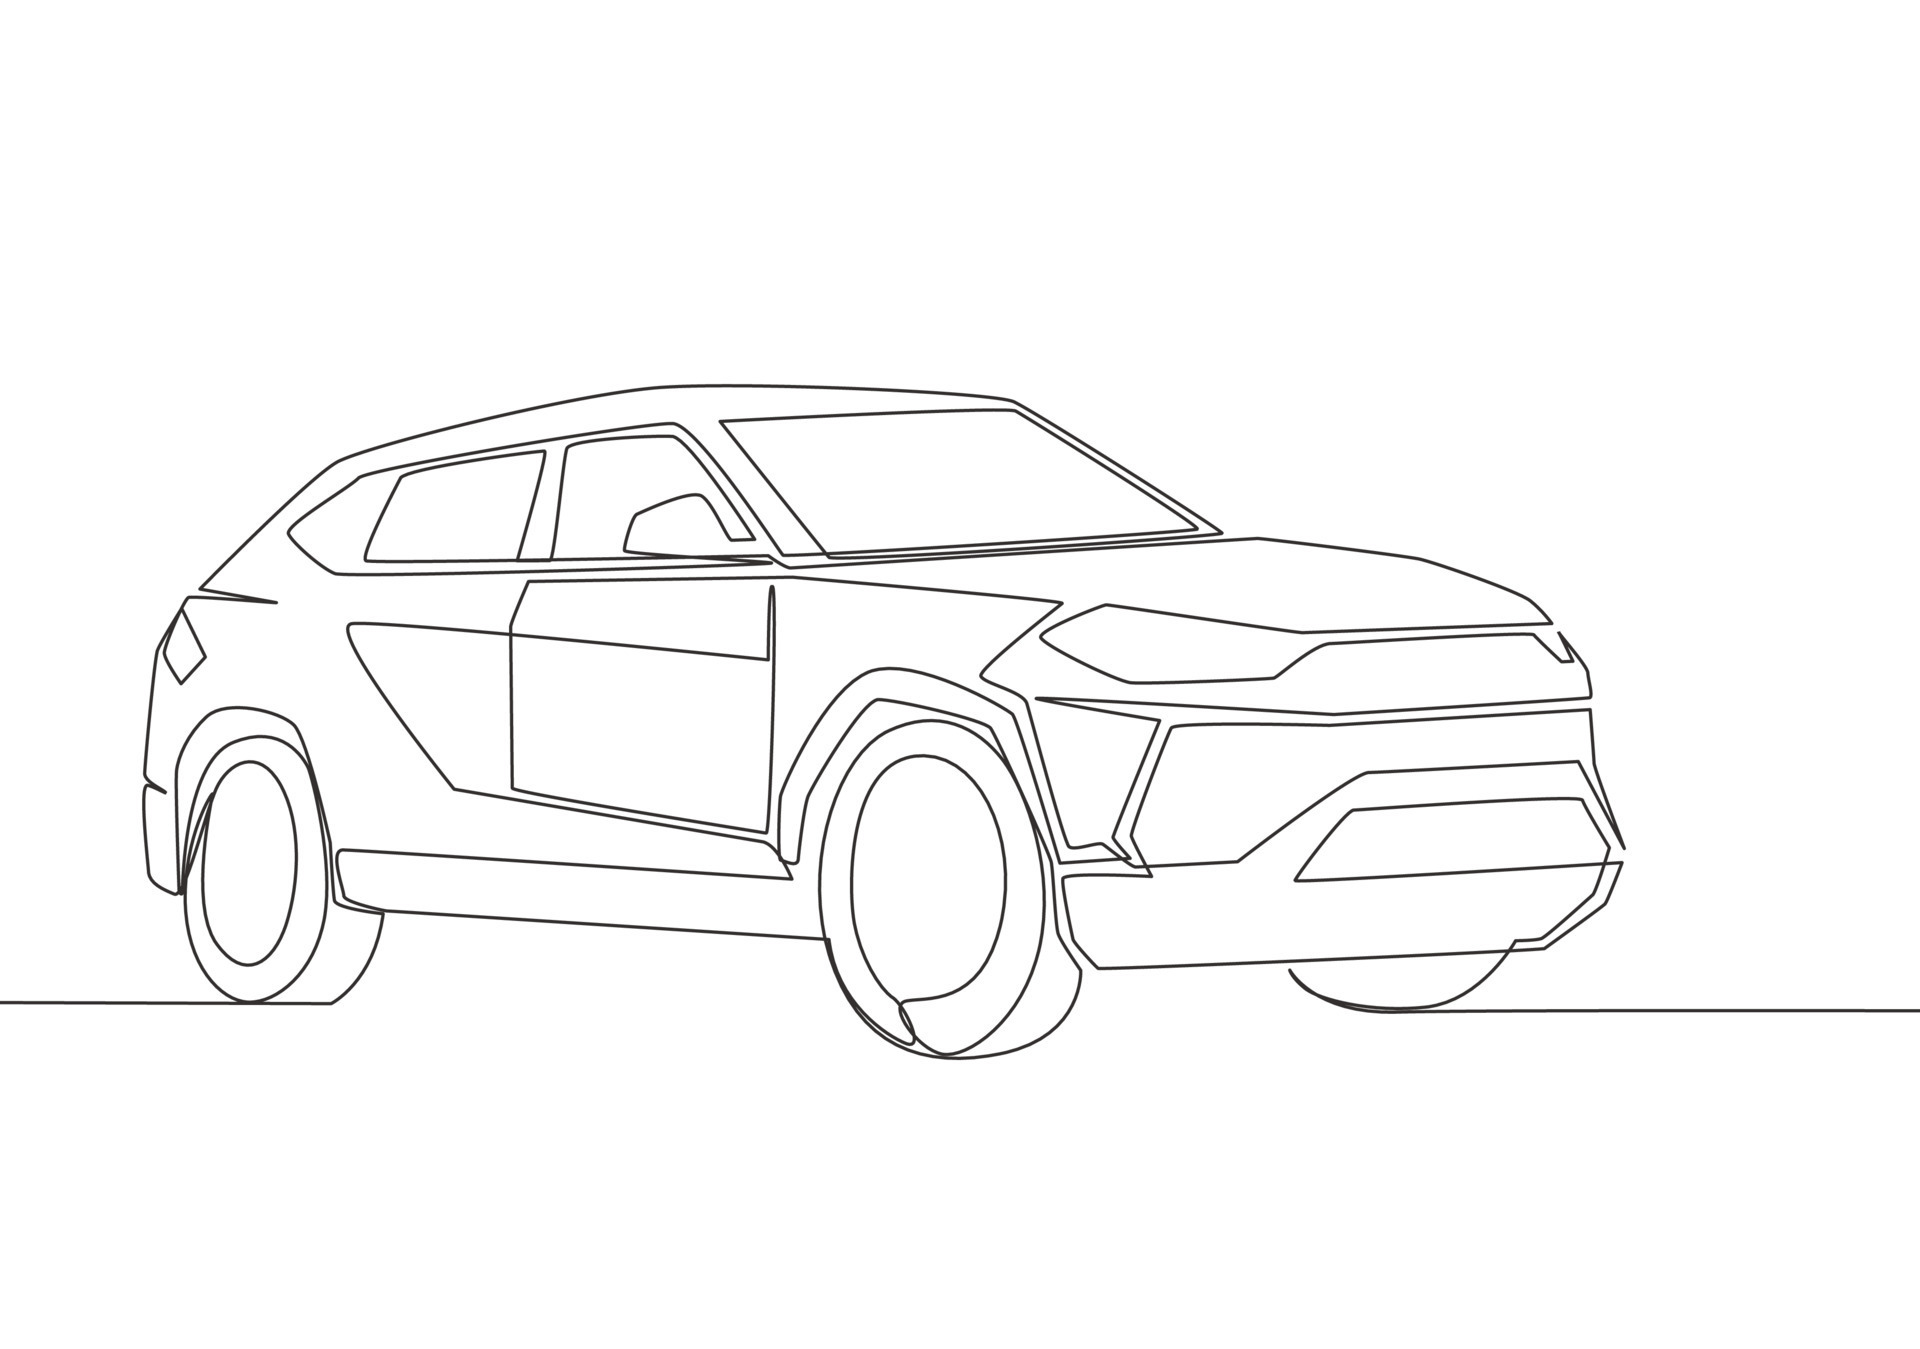 SUV Concept drawing with pencil and marker - Car Body Design